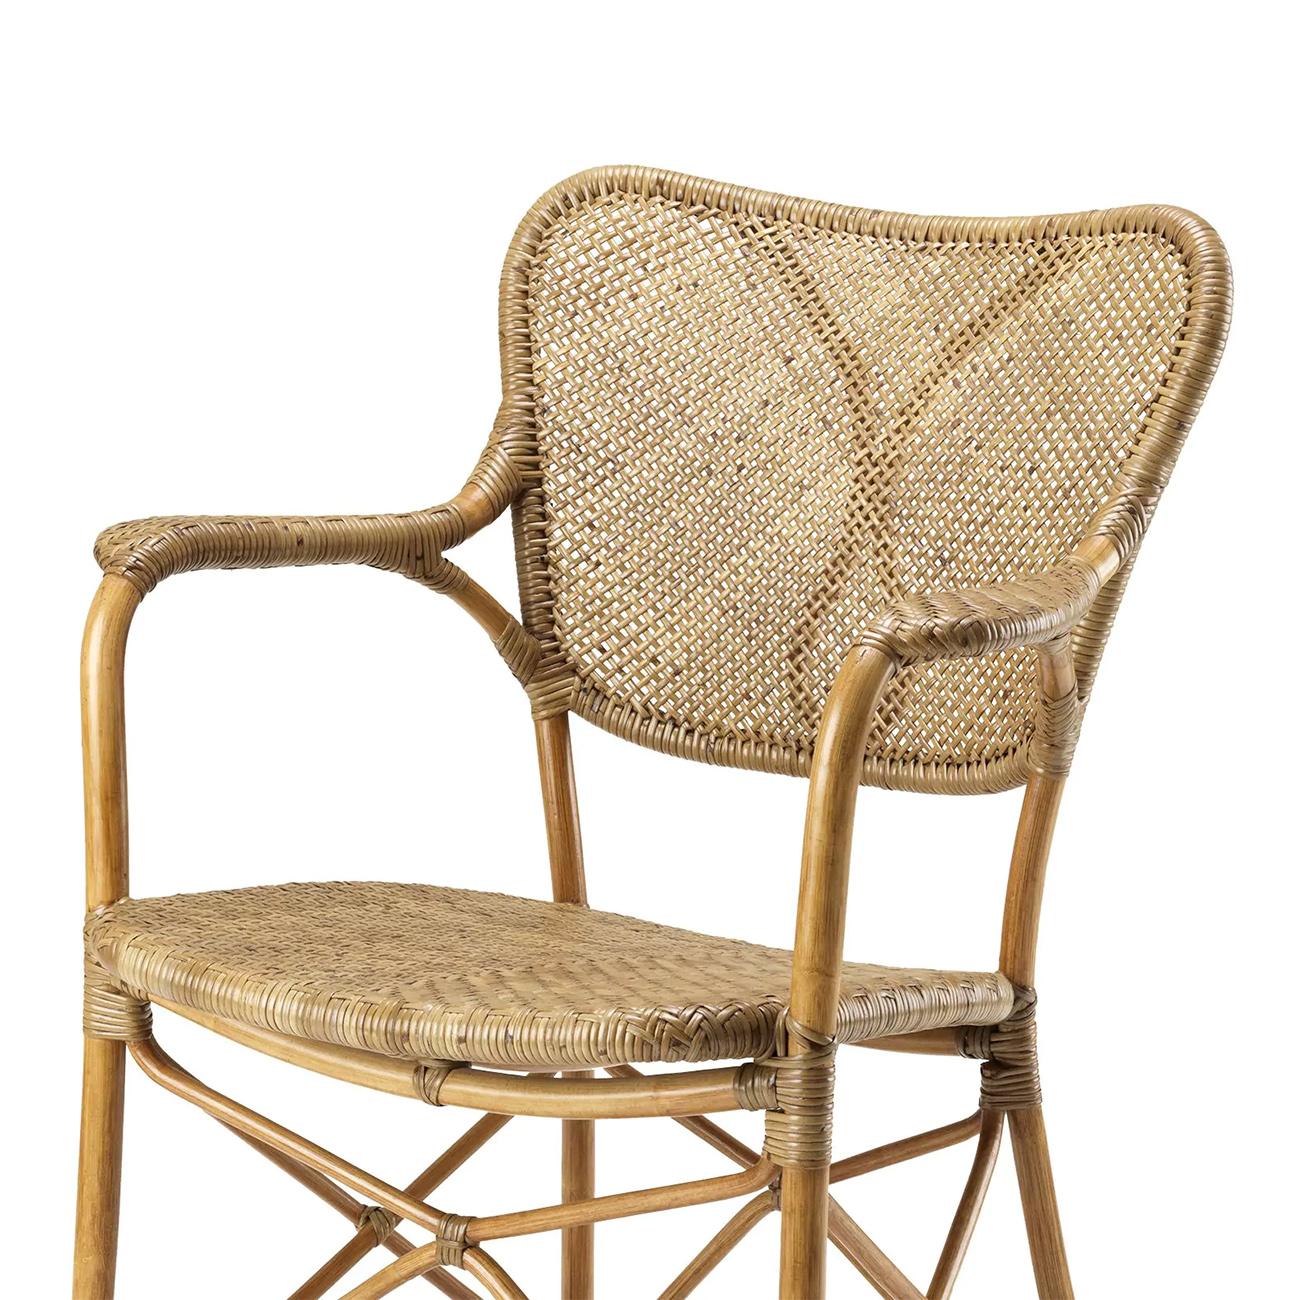 Chair with arm Rattan style all in
natural rattan in clear finish.